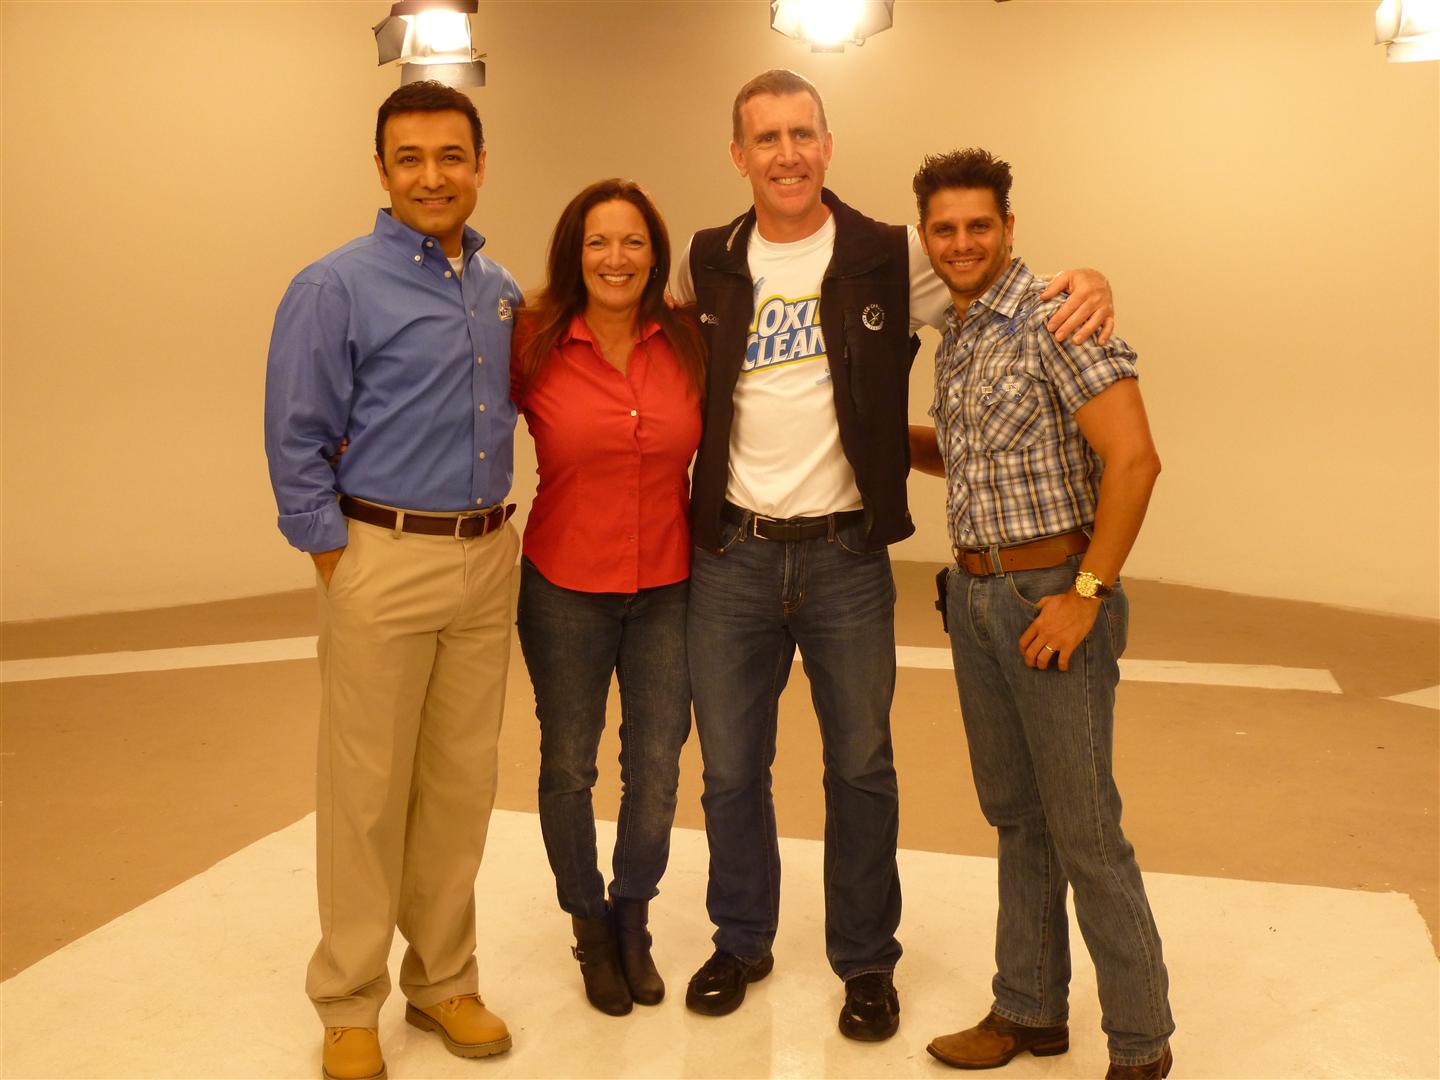 Donna Palm,Anthony Sullivan and Spanish Speaking Oxiclean Pitchmen during Commercial Shoot